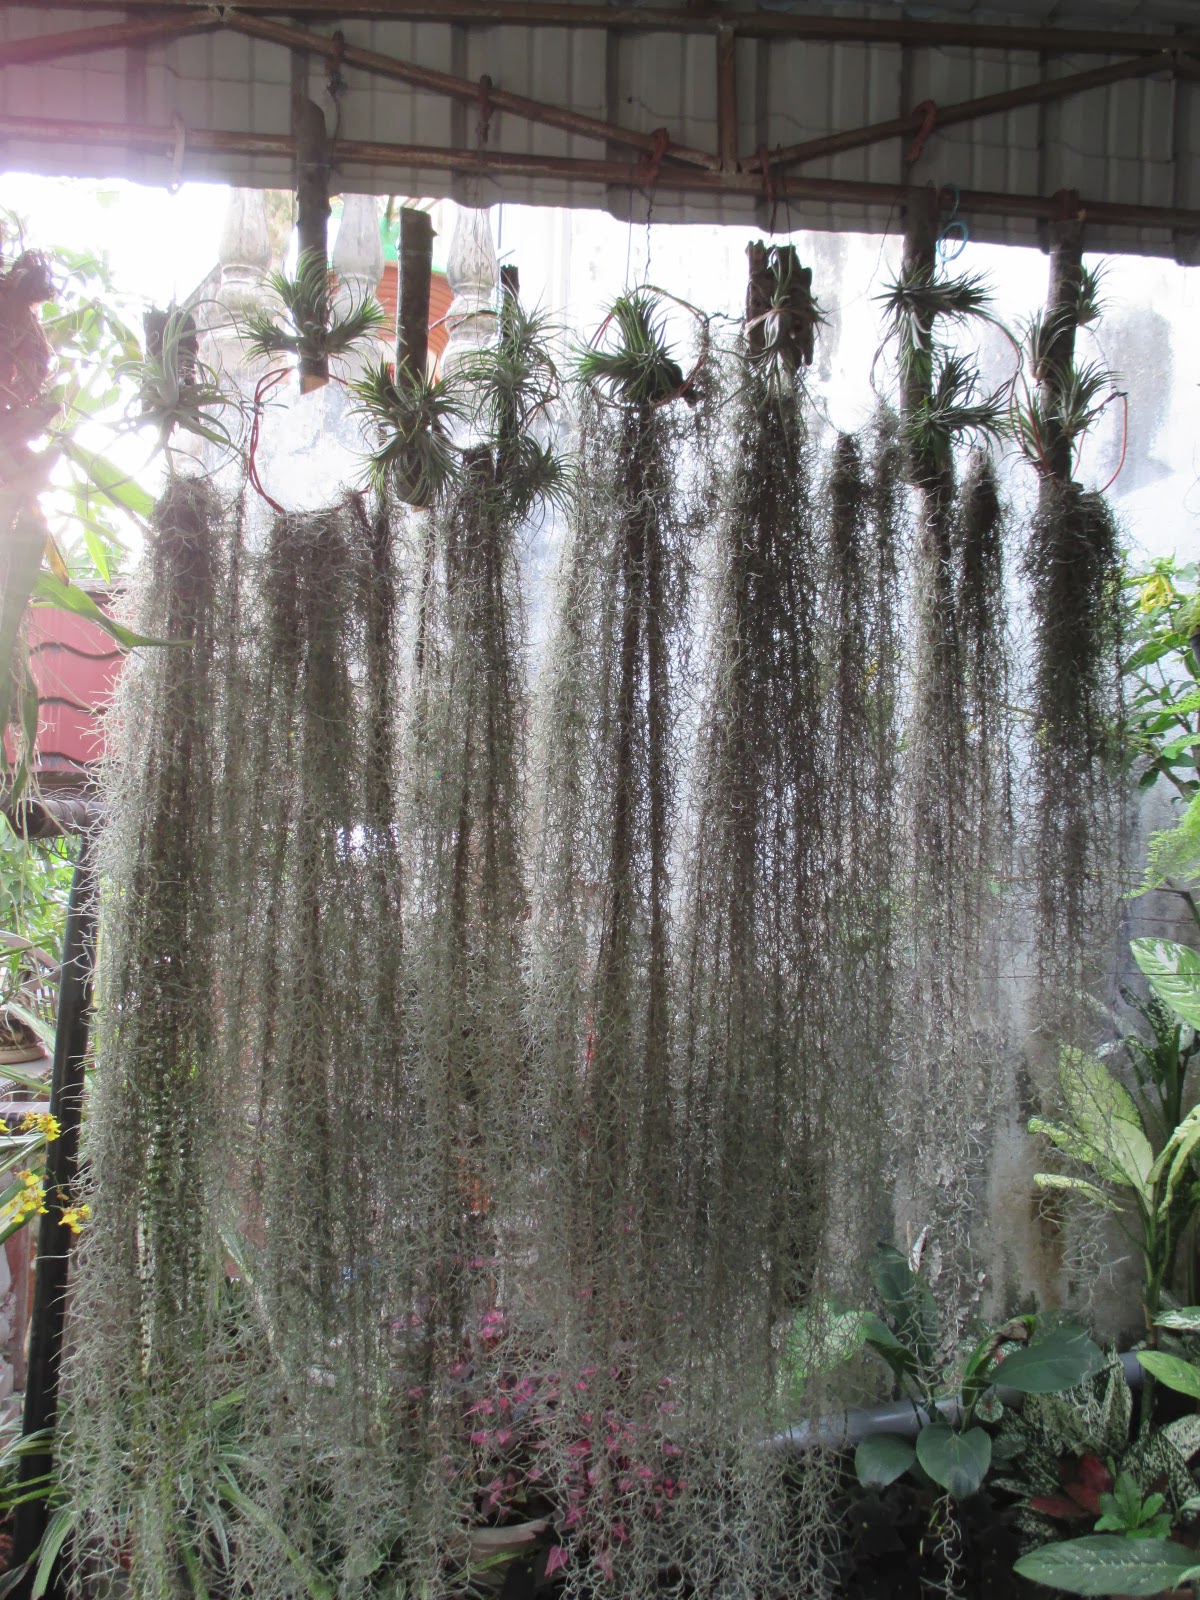 Garden Chronicles of James David: Airplants and Spanish Moss - Updates.